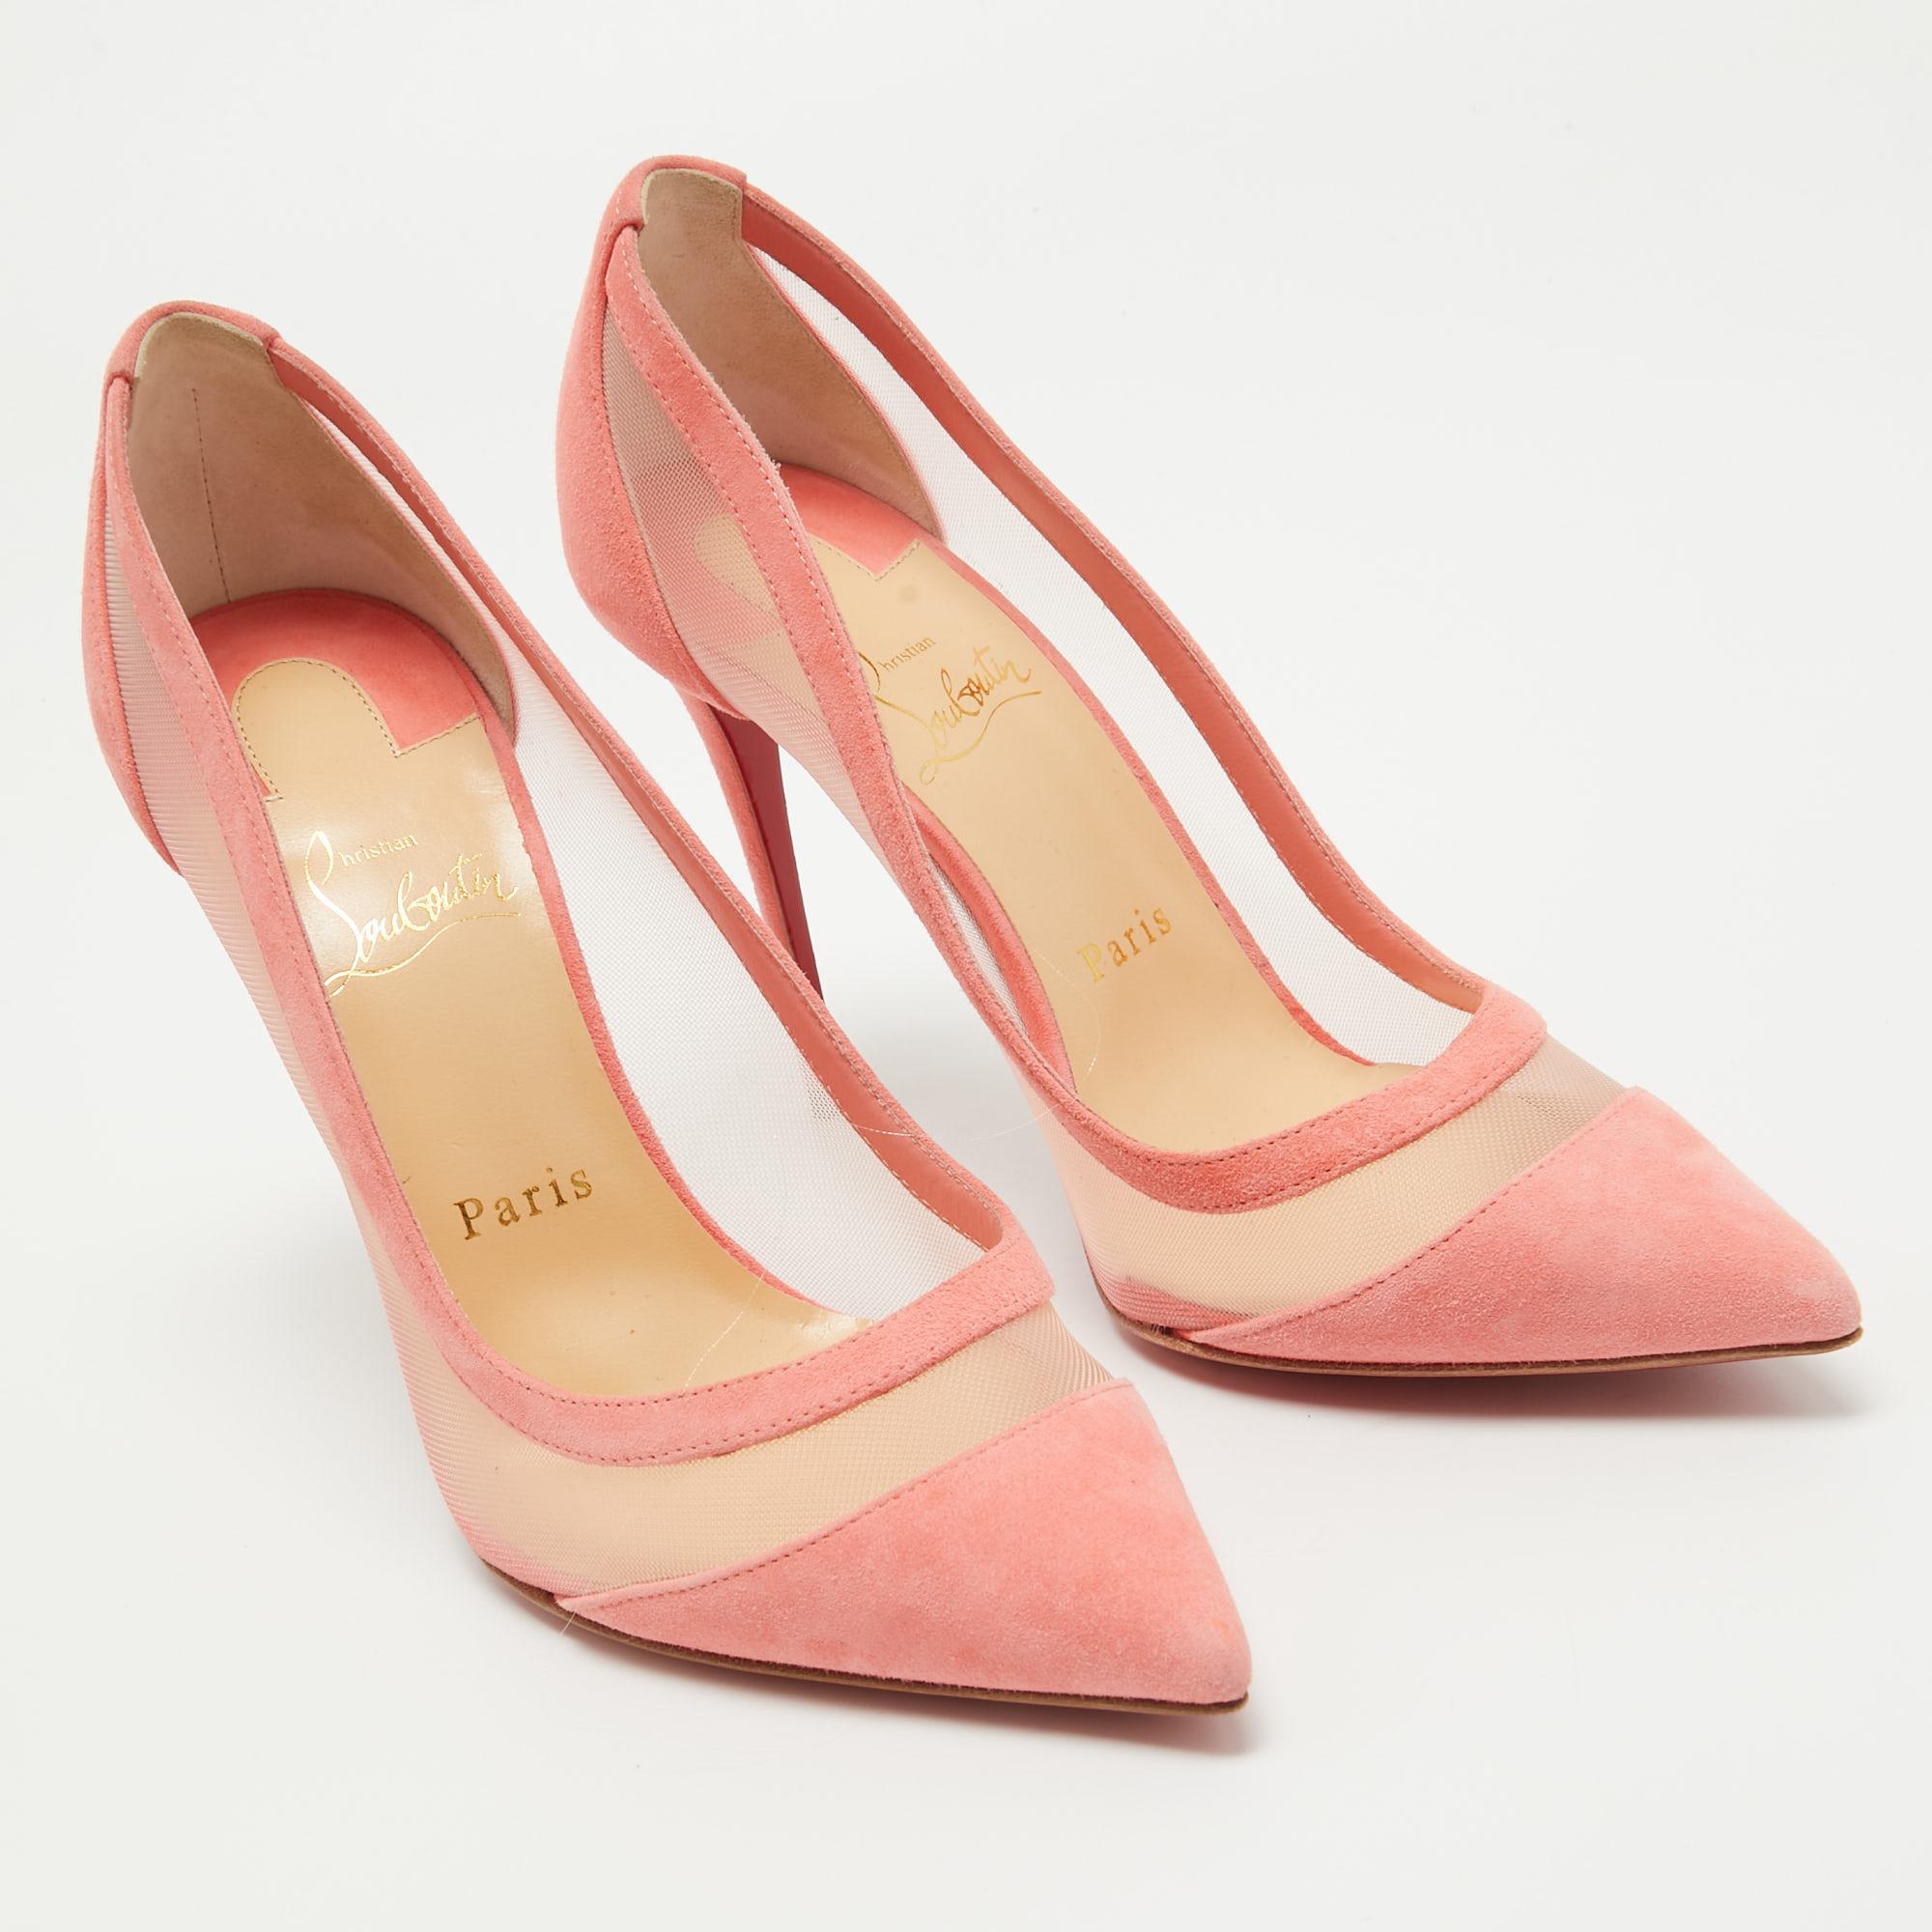 Christian Louboutin Pink Suede and Mesh Galativi Pumps Size 38.5 In Excellent Condition For Sale In Dubai, Al Qouz 2